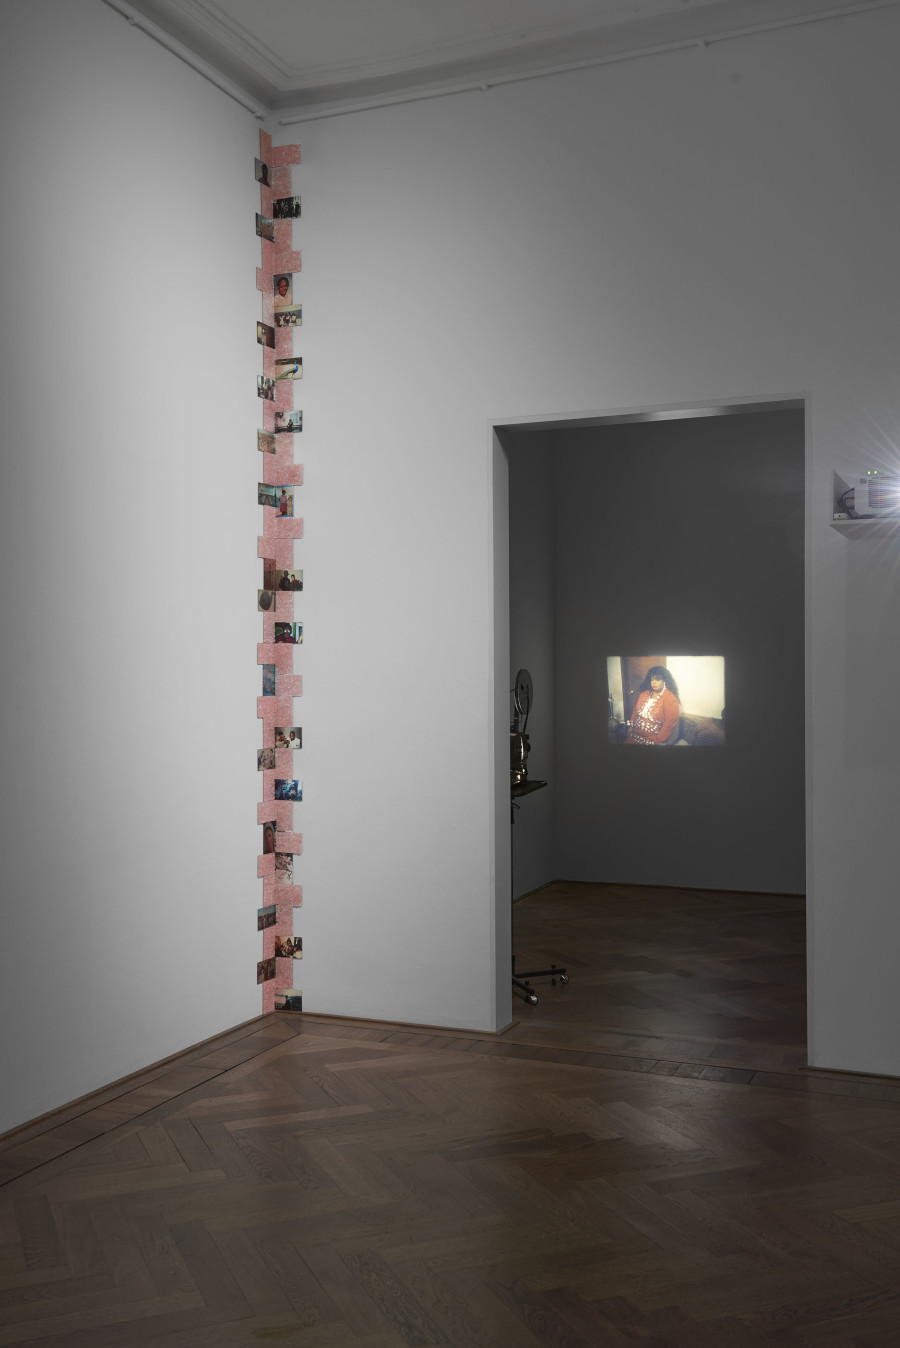 Deana Lawson, installation view, Centropy, Kunsthalle Basel, 2020, detail of Crystal Assemblage (working title), 2020 (left) and view on Fragment (Jacqueline and Taneisha) (working title), 2020 (right). Photo: Philipp Hänger / Kunsthalle Basel